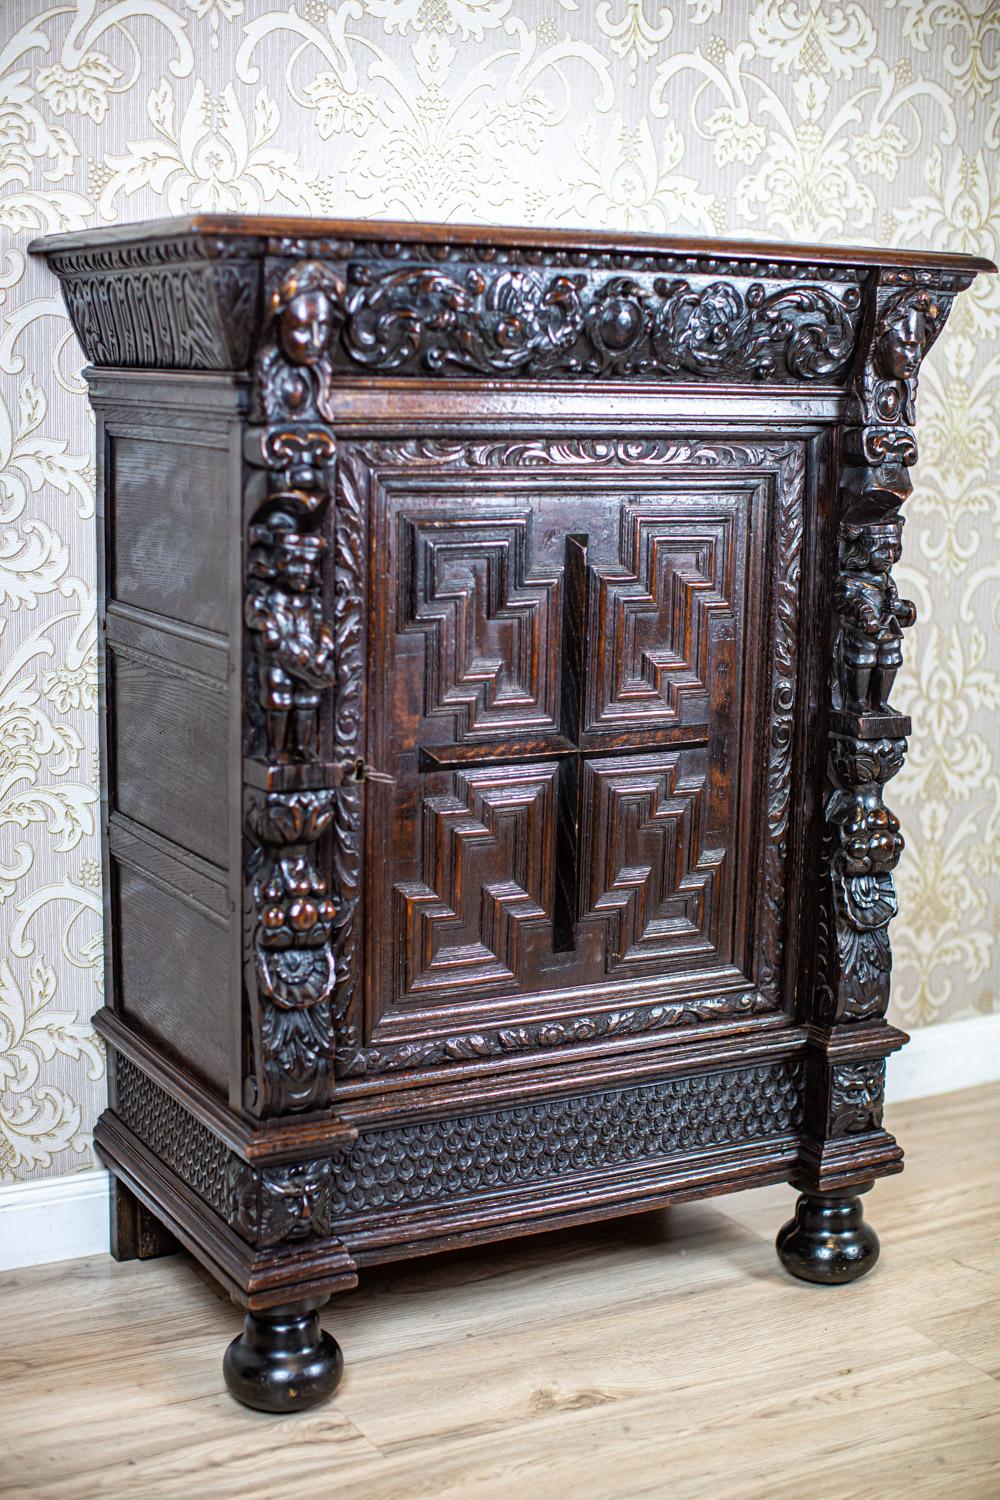 Massive Carved Oak Commode from the Late 19th Century

Single-winged structure topped with a cornice and featuring a single drawer, covered with a tabletop plate on the top. The front of the furniture is adorned with rich carving depicting